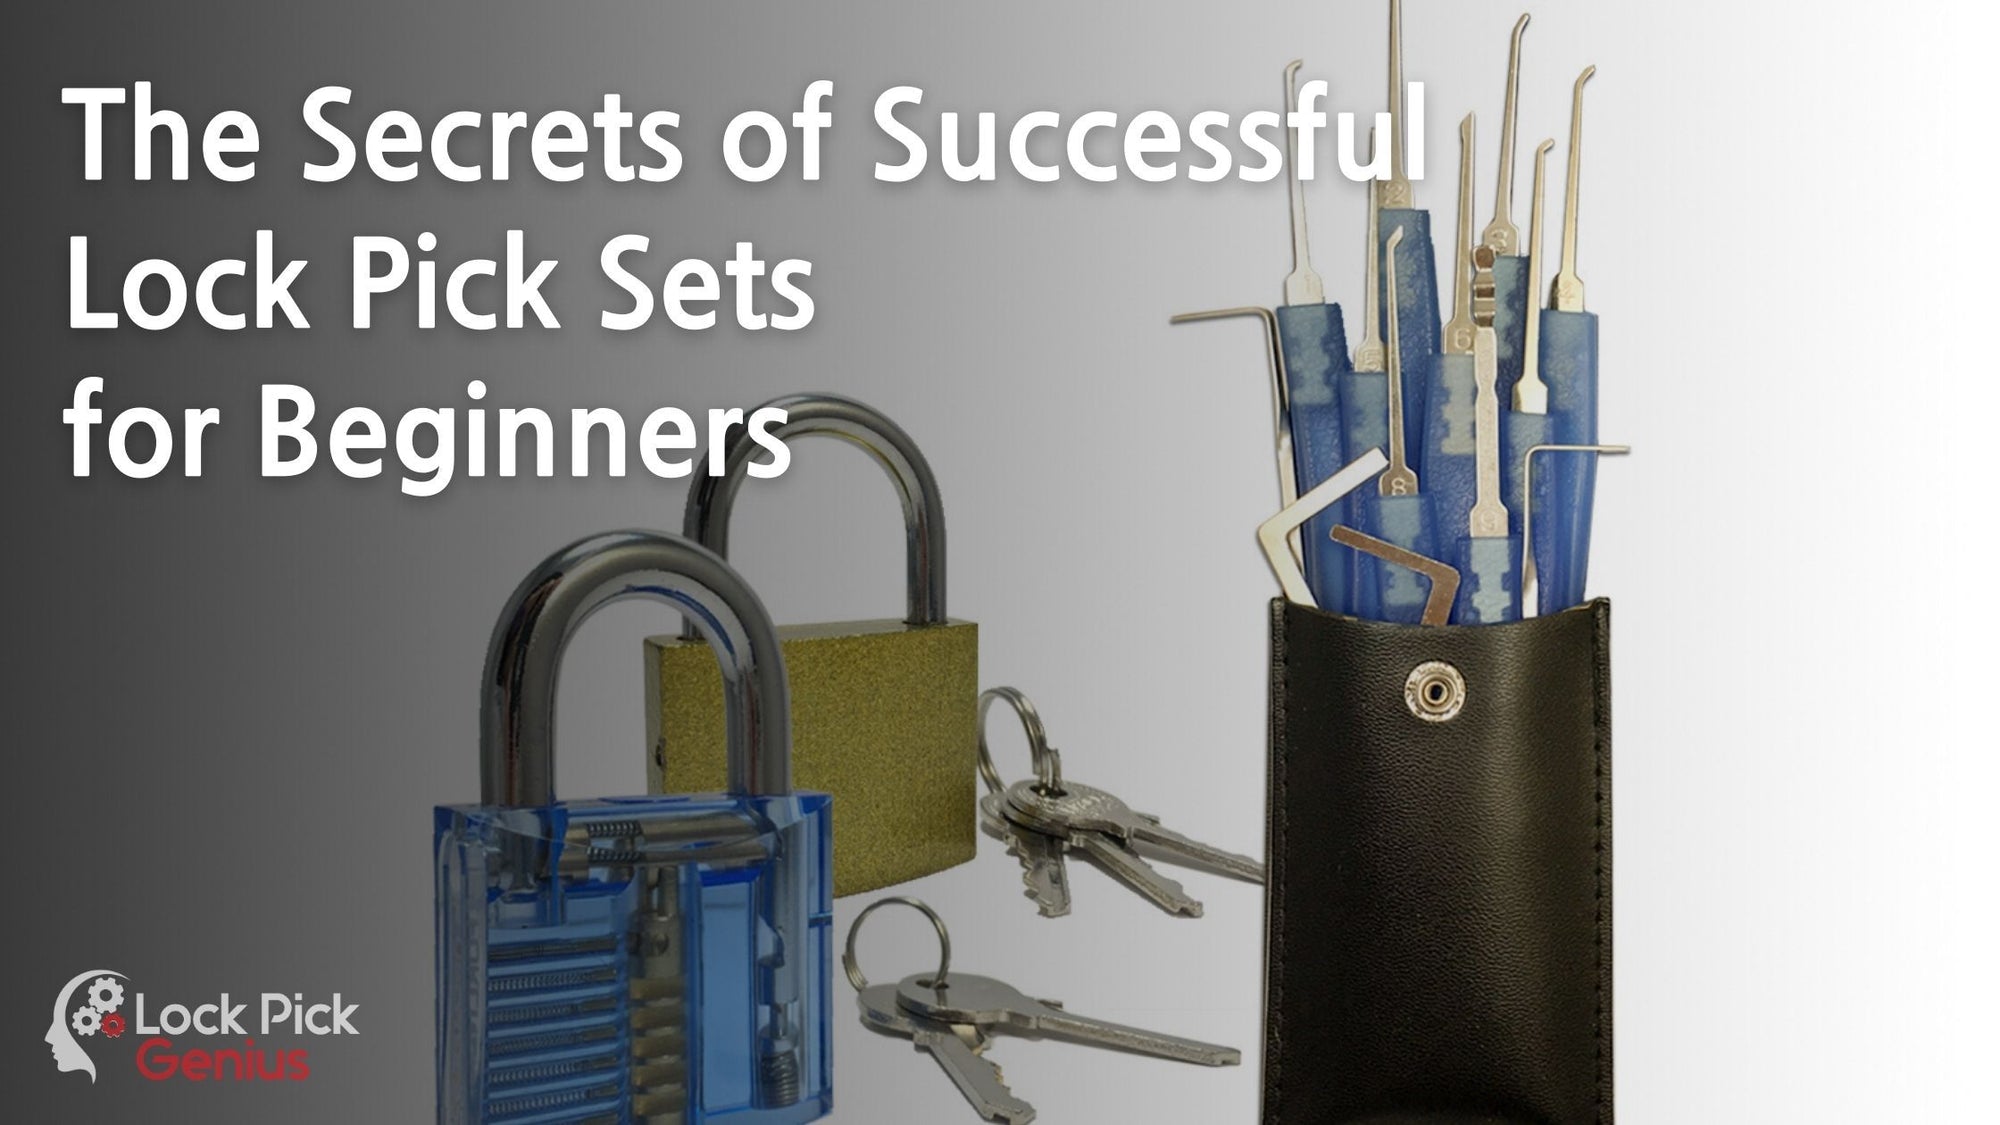 The Secrets of Successful Lock Pick Sets for Beginners